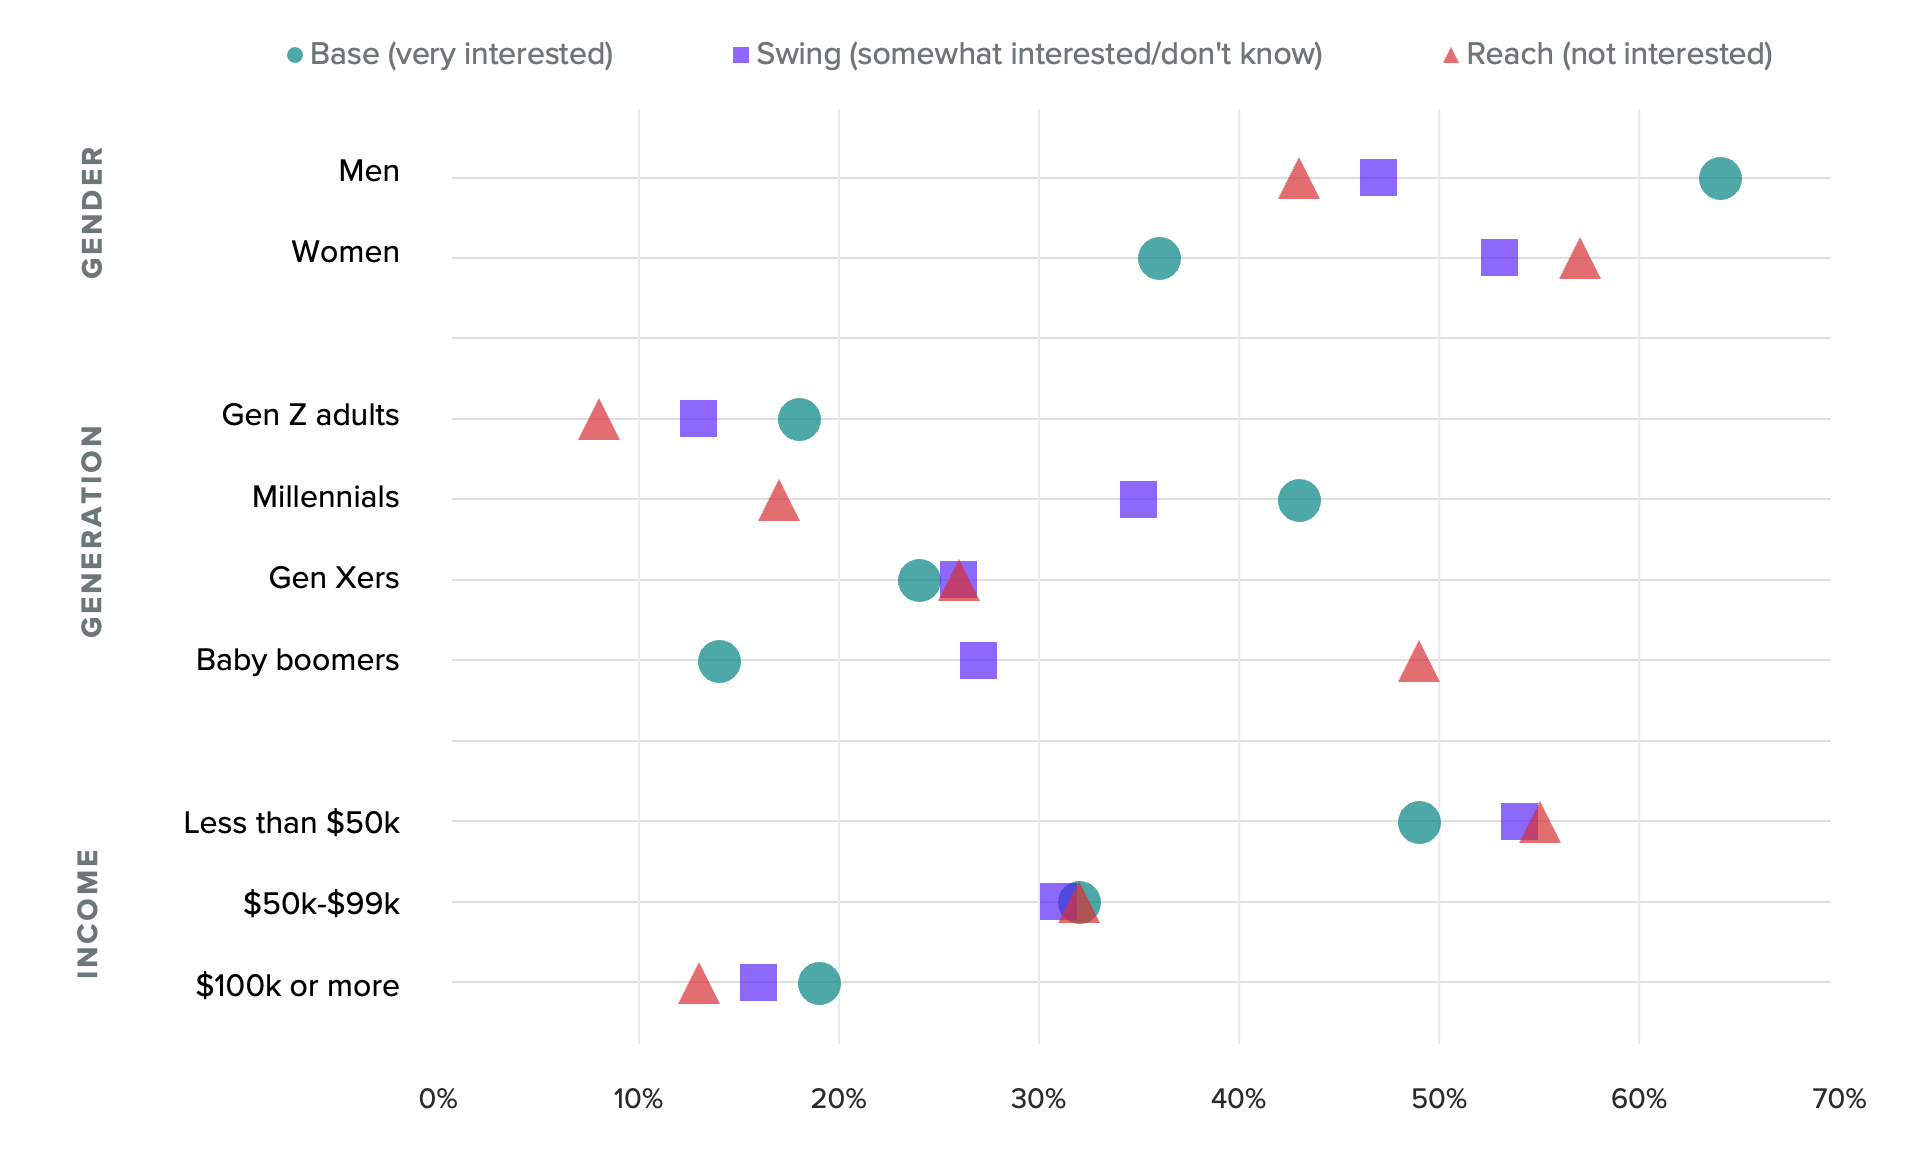 Dot plot of the demographic makeup of virtual reality audiences, showing the population that has used VR or own a Meta Quest 2 skews male and younger.